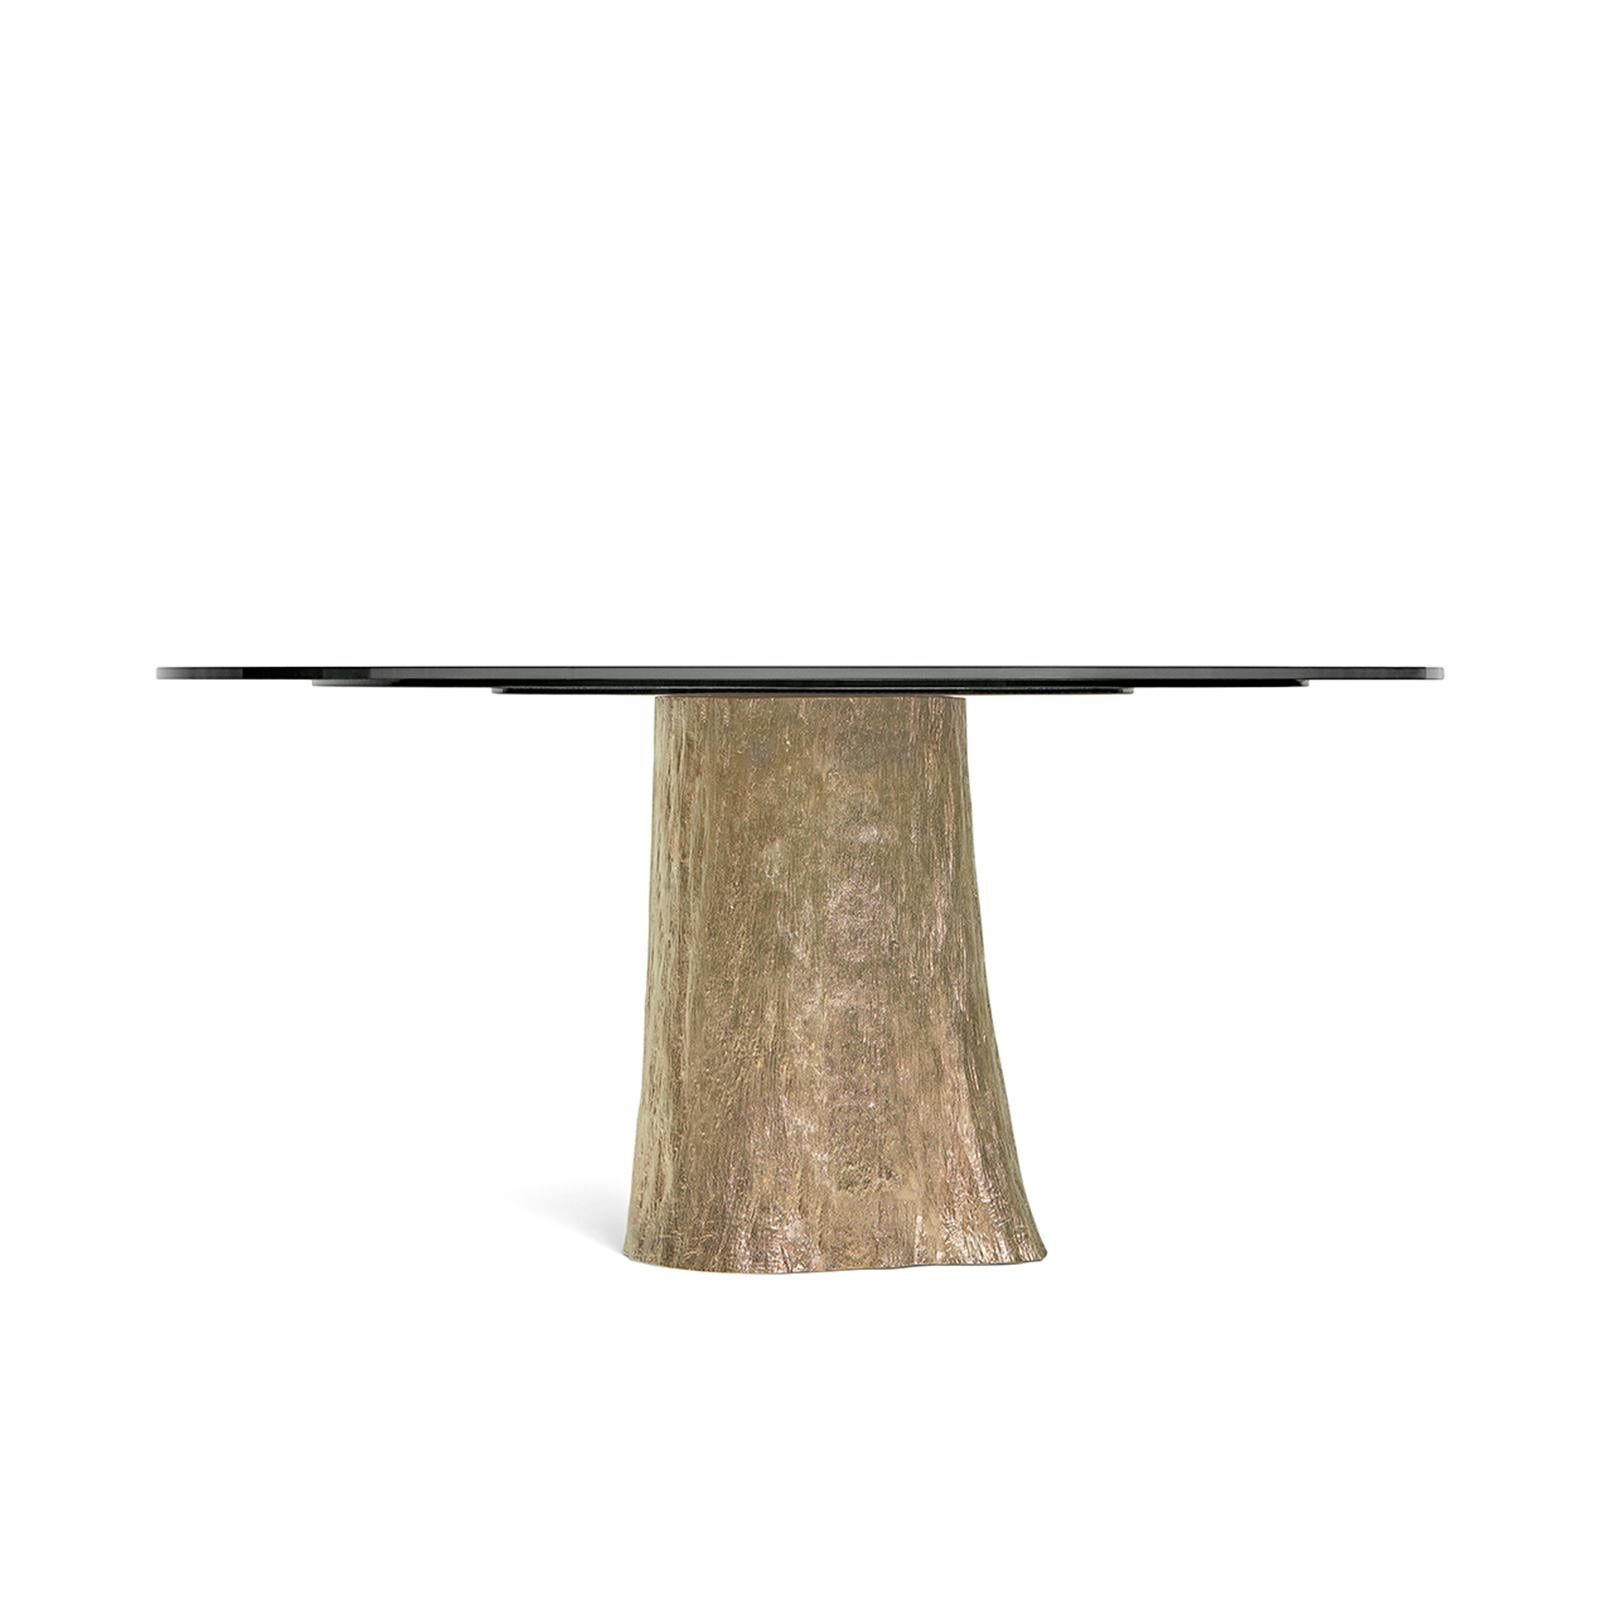 This table represents the vessel of the energy of slow moving waters. They may seem still, but they hold the source of life. The base is made of brass casting of an oak trunk, while the top is composed of three layers of glass, subtly conveying the